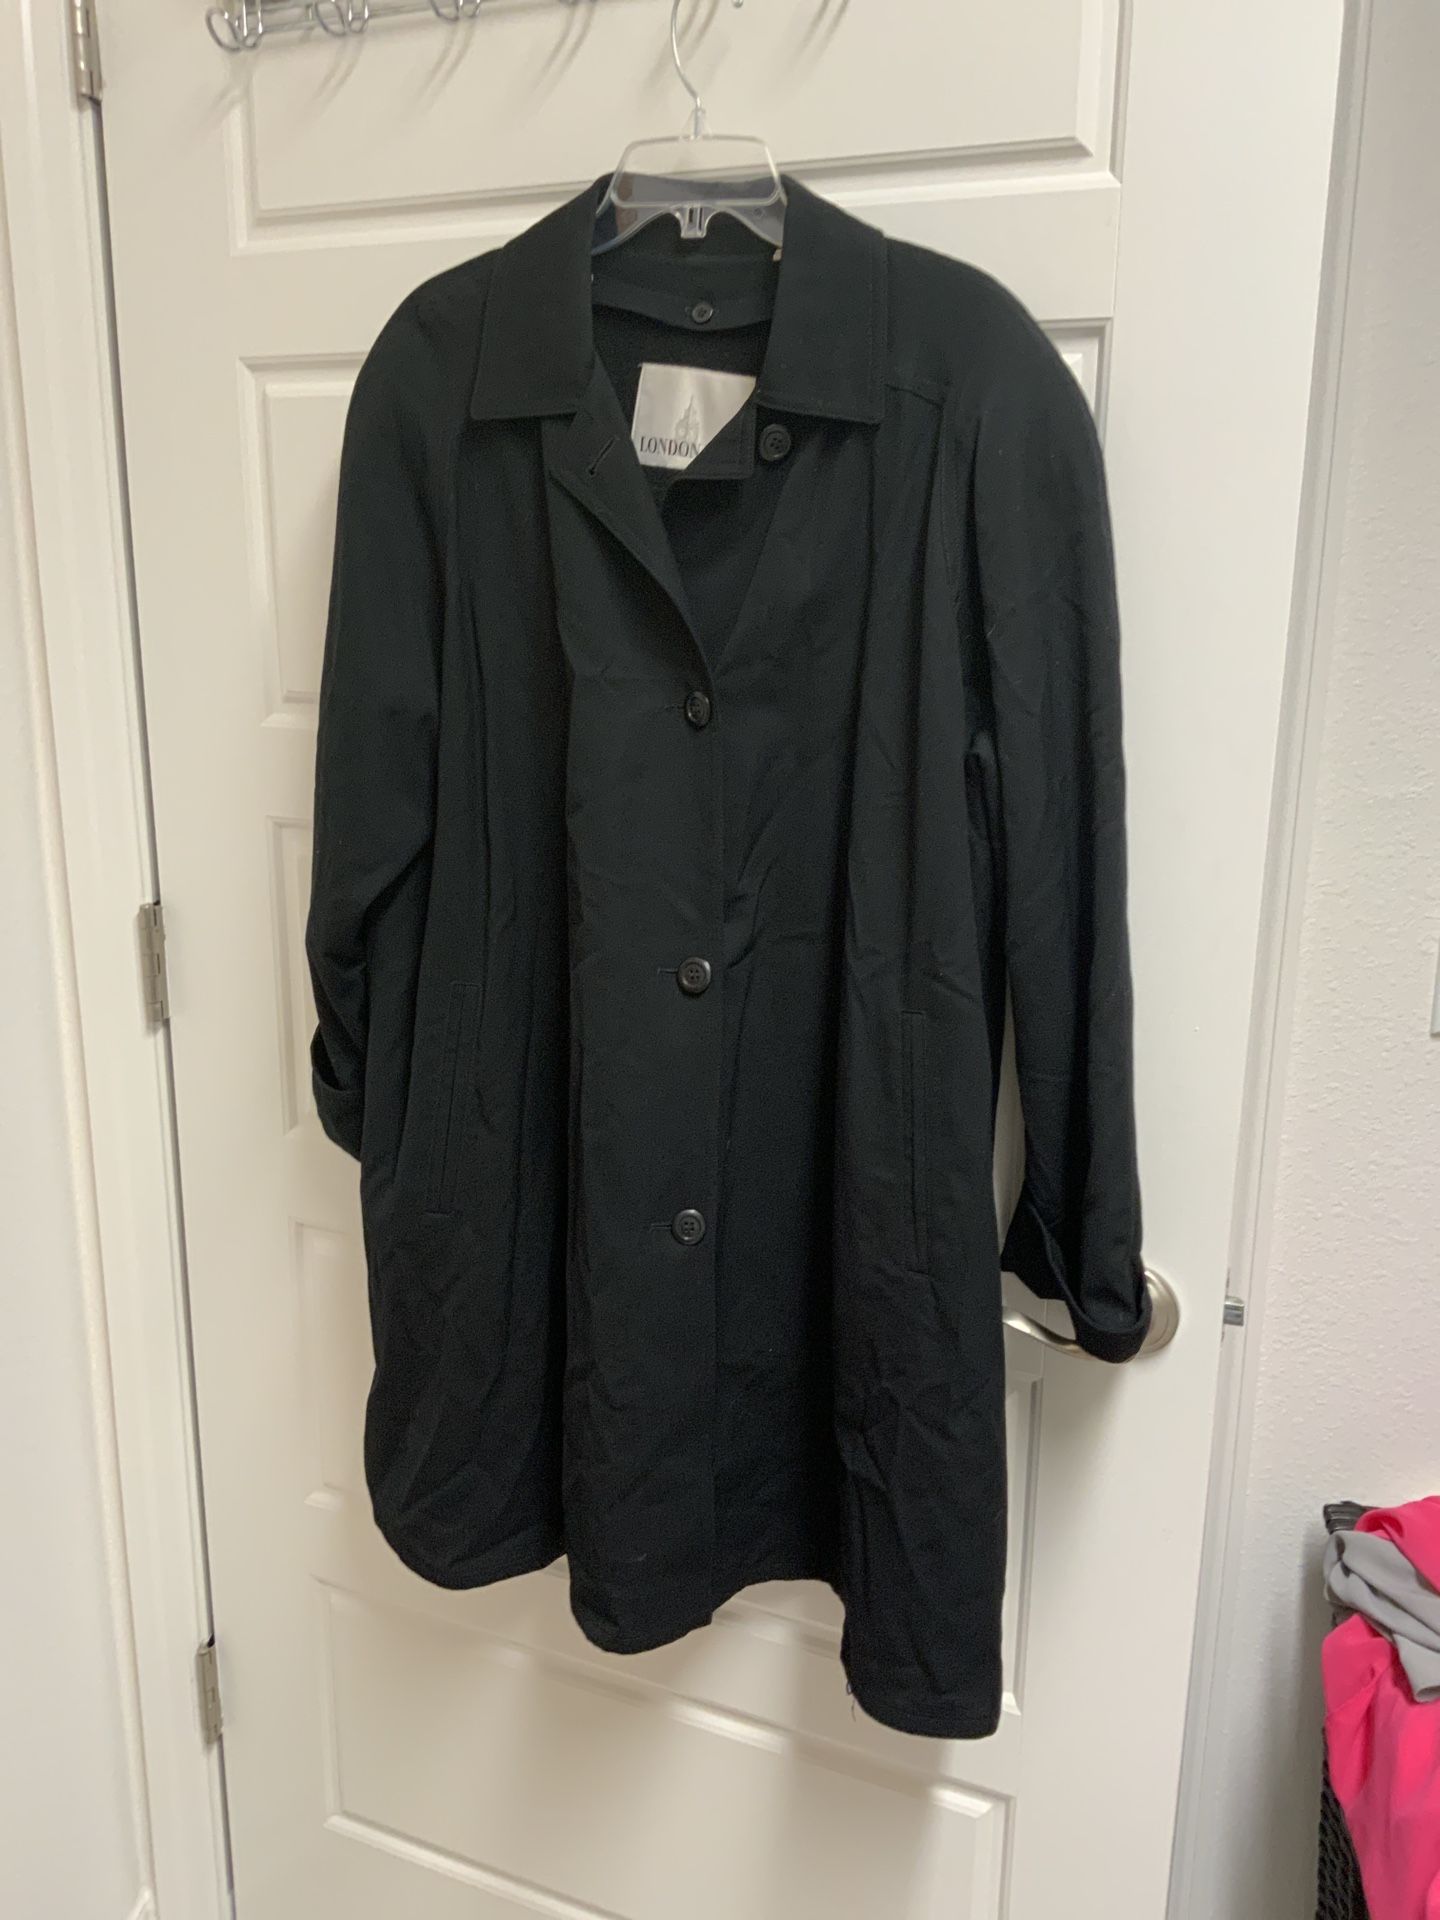 London Fog rain trenchcoat with removable Wool Liner Size is 12